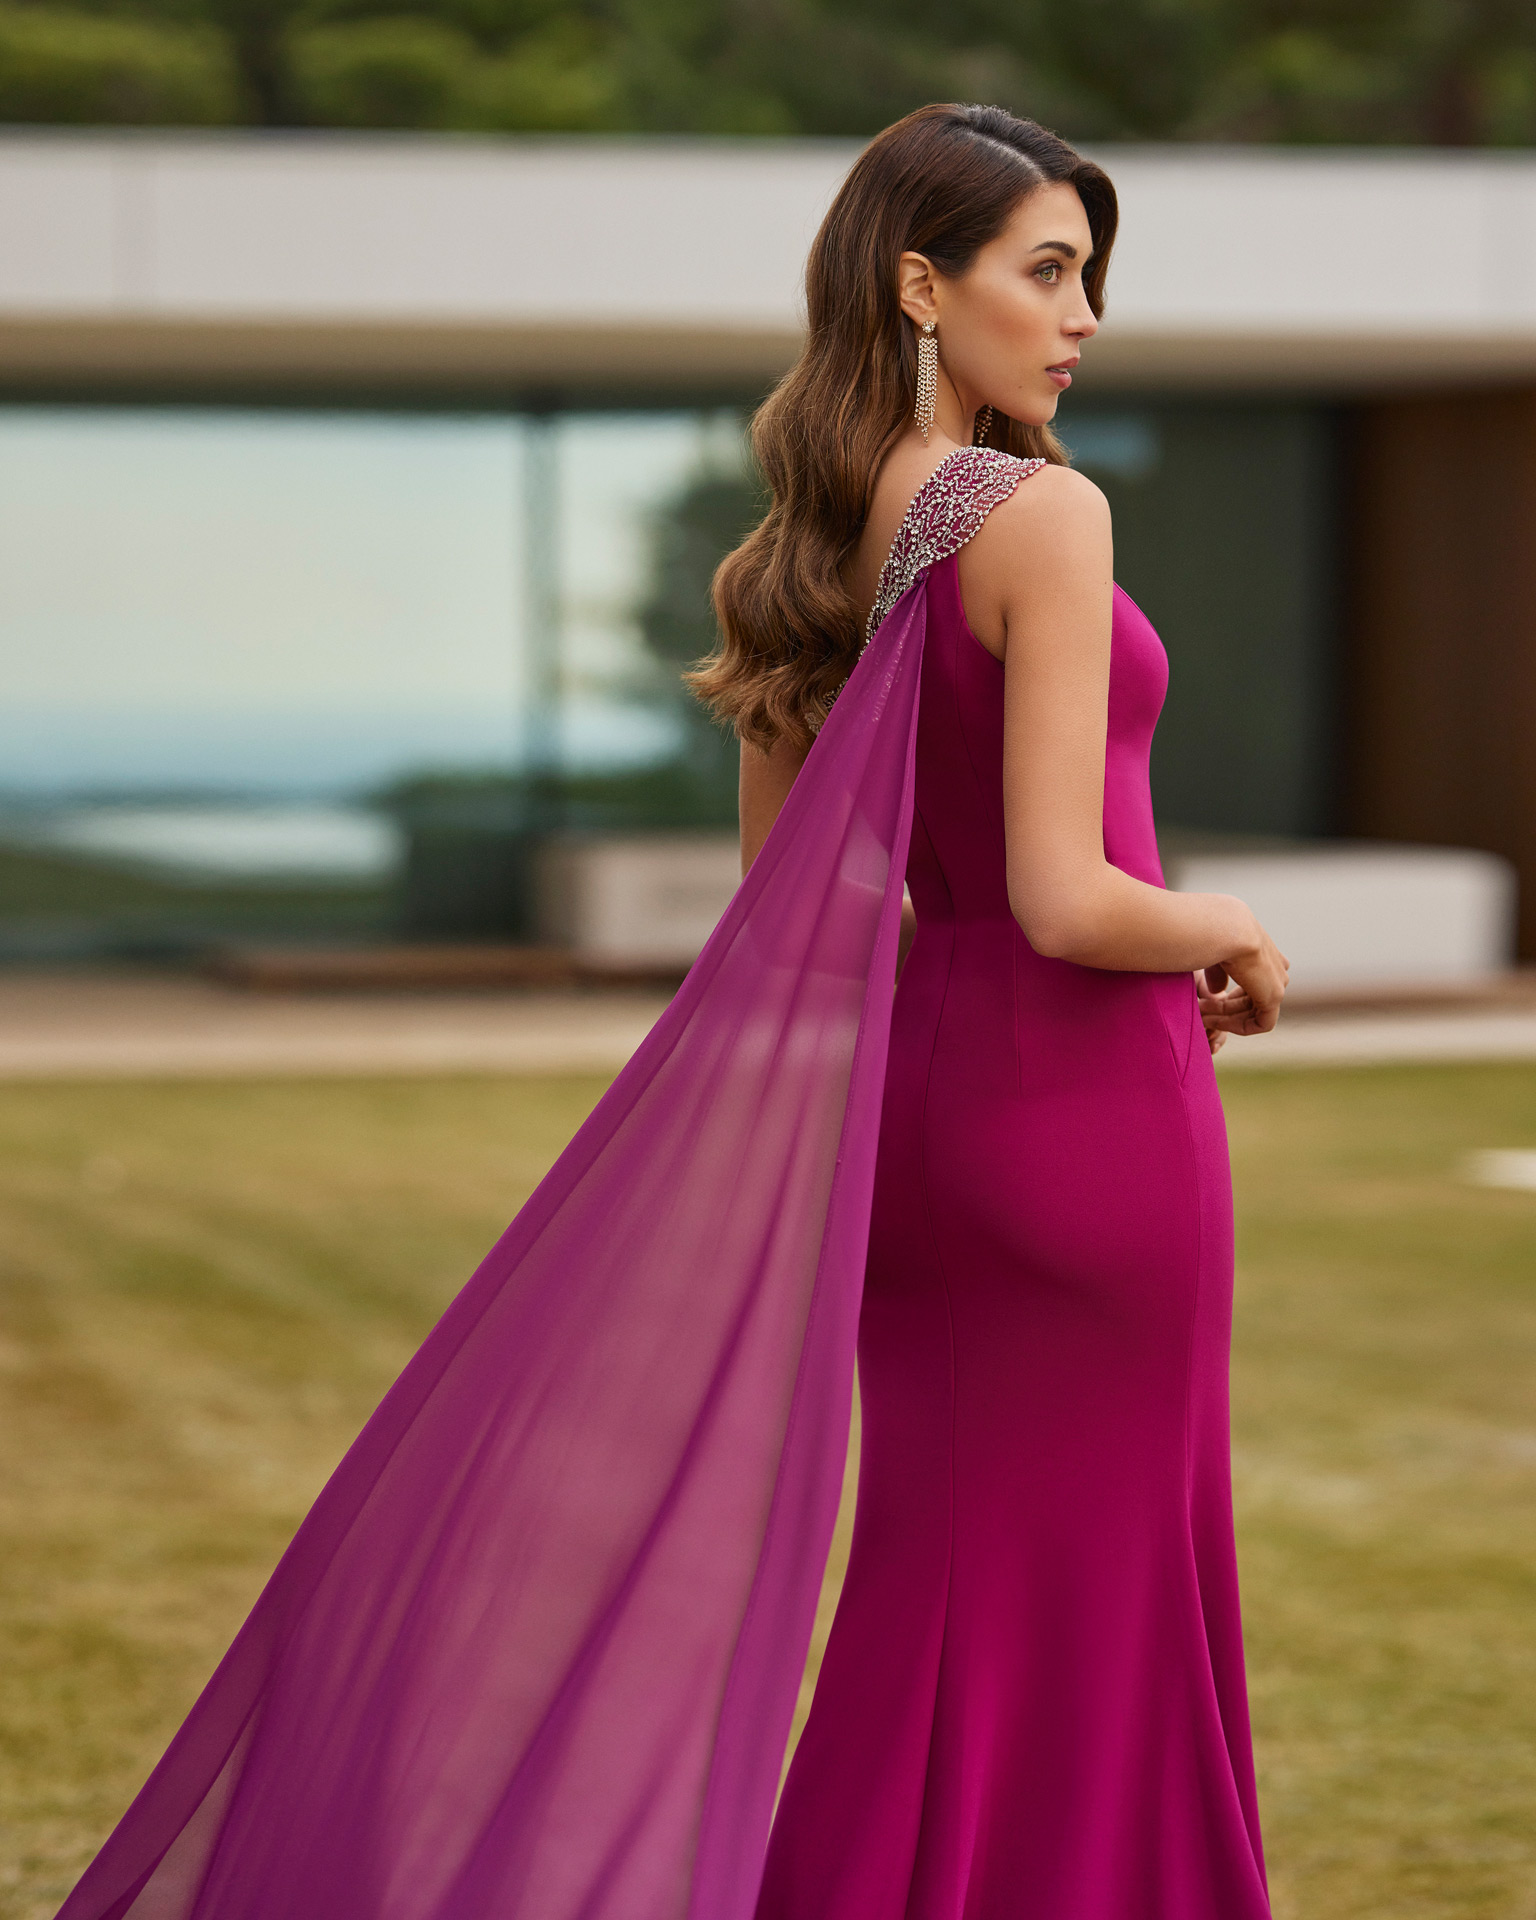 Elegant long evening dress. Made with crêpe embellished with beadwork. With asymmetrical crew neckline, closed back and drape. Exclusive Marfil Barcelona look. MARFIL_BARCELONA.